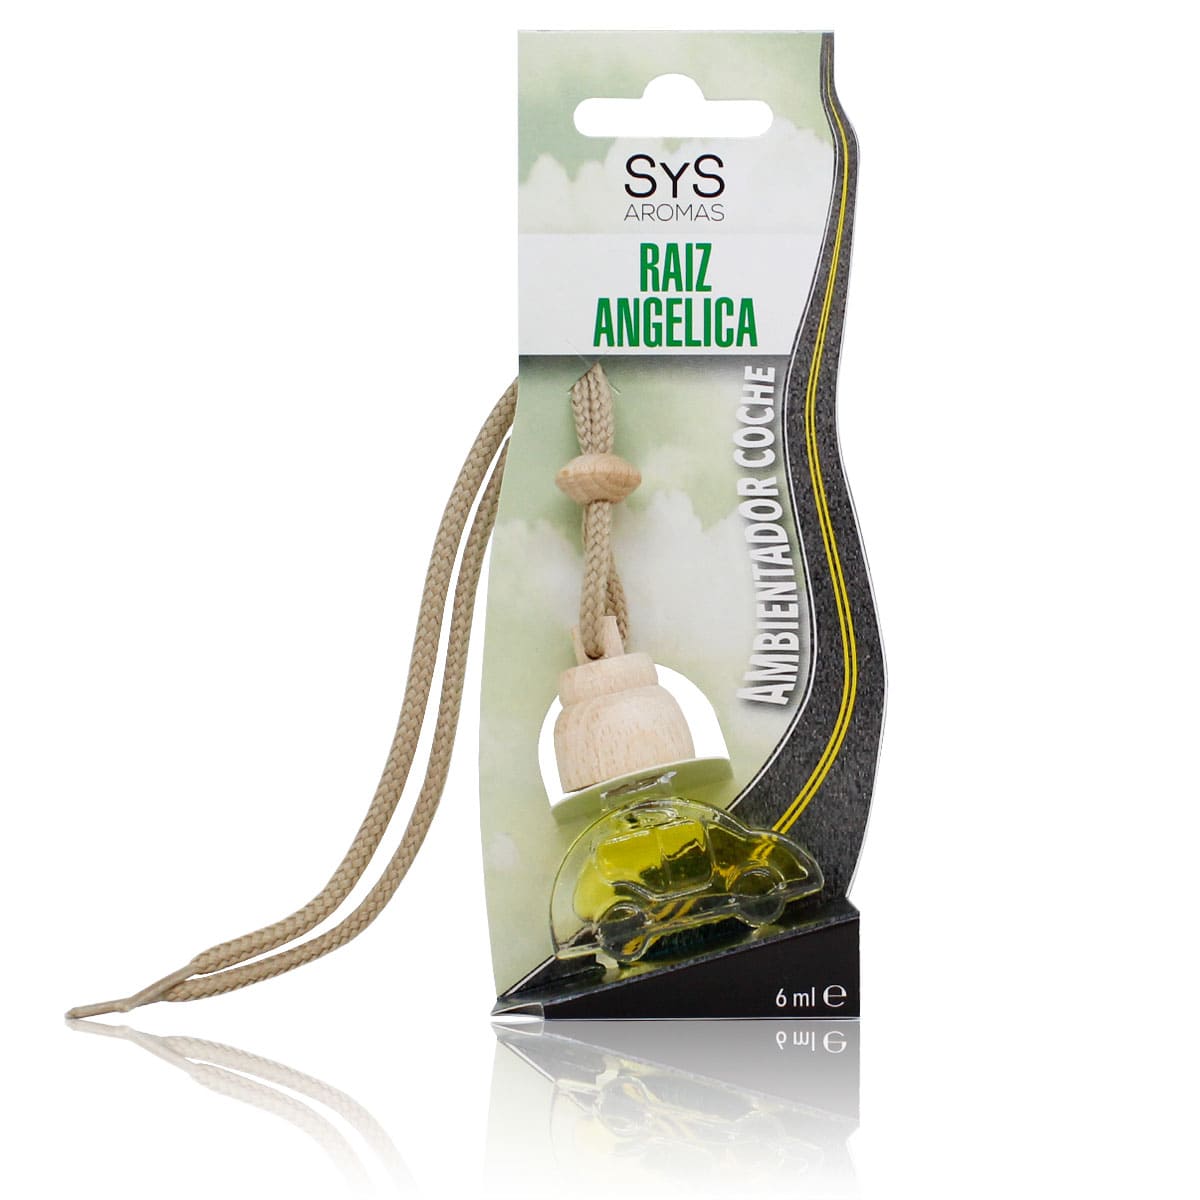 Buy Angelica Root Air freshener 6ml Little Car SYS Aromas